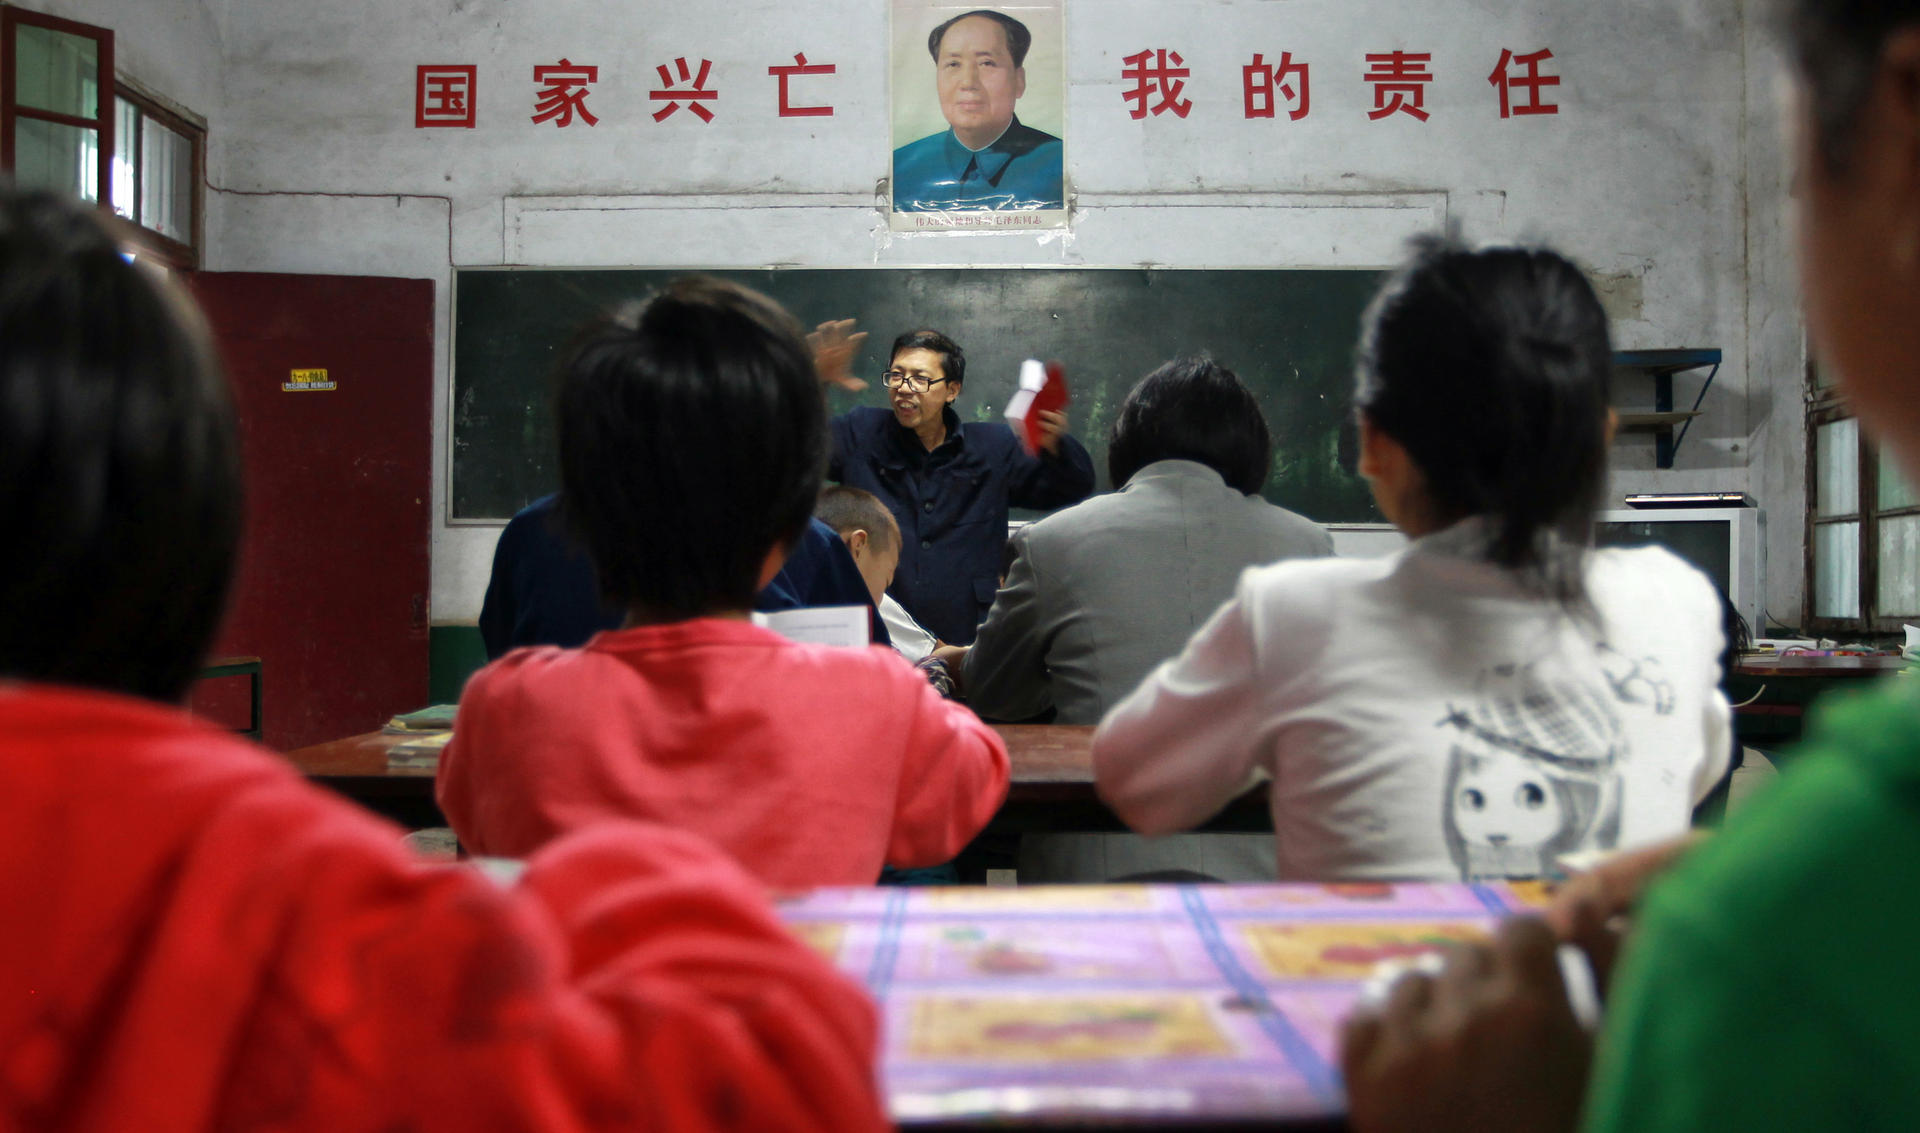 Democracy School principal Xia Zuhai holds a copy of Mao Zedong's little red book as he delivers a speech during morning class on September 9, the 37th anniversary of Mao's death. The slogan on the wall says: "The country's rise and fall is my responsibility."